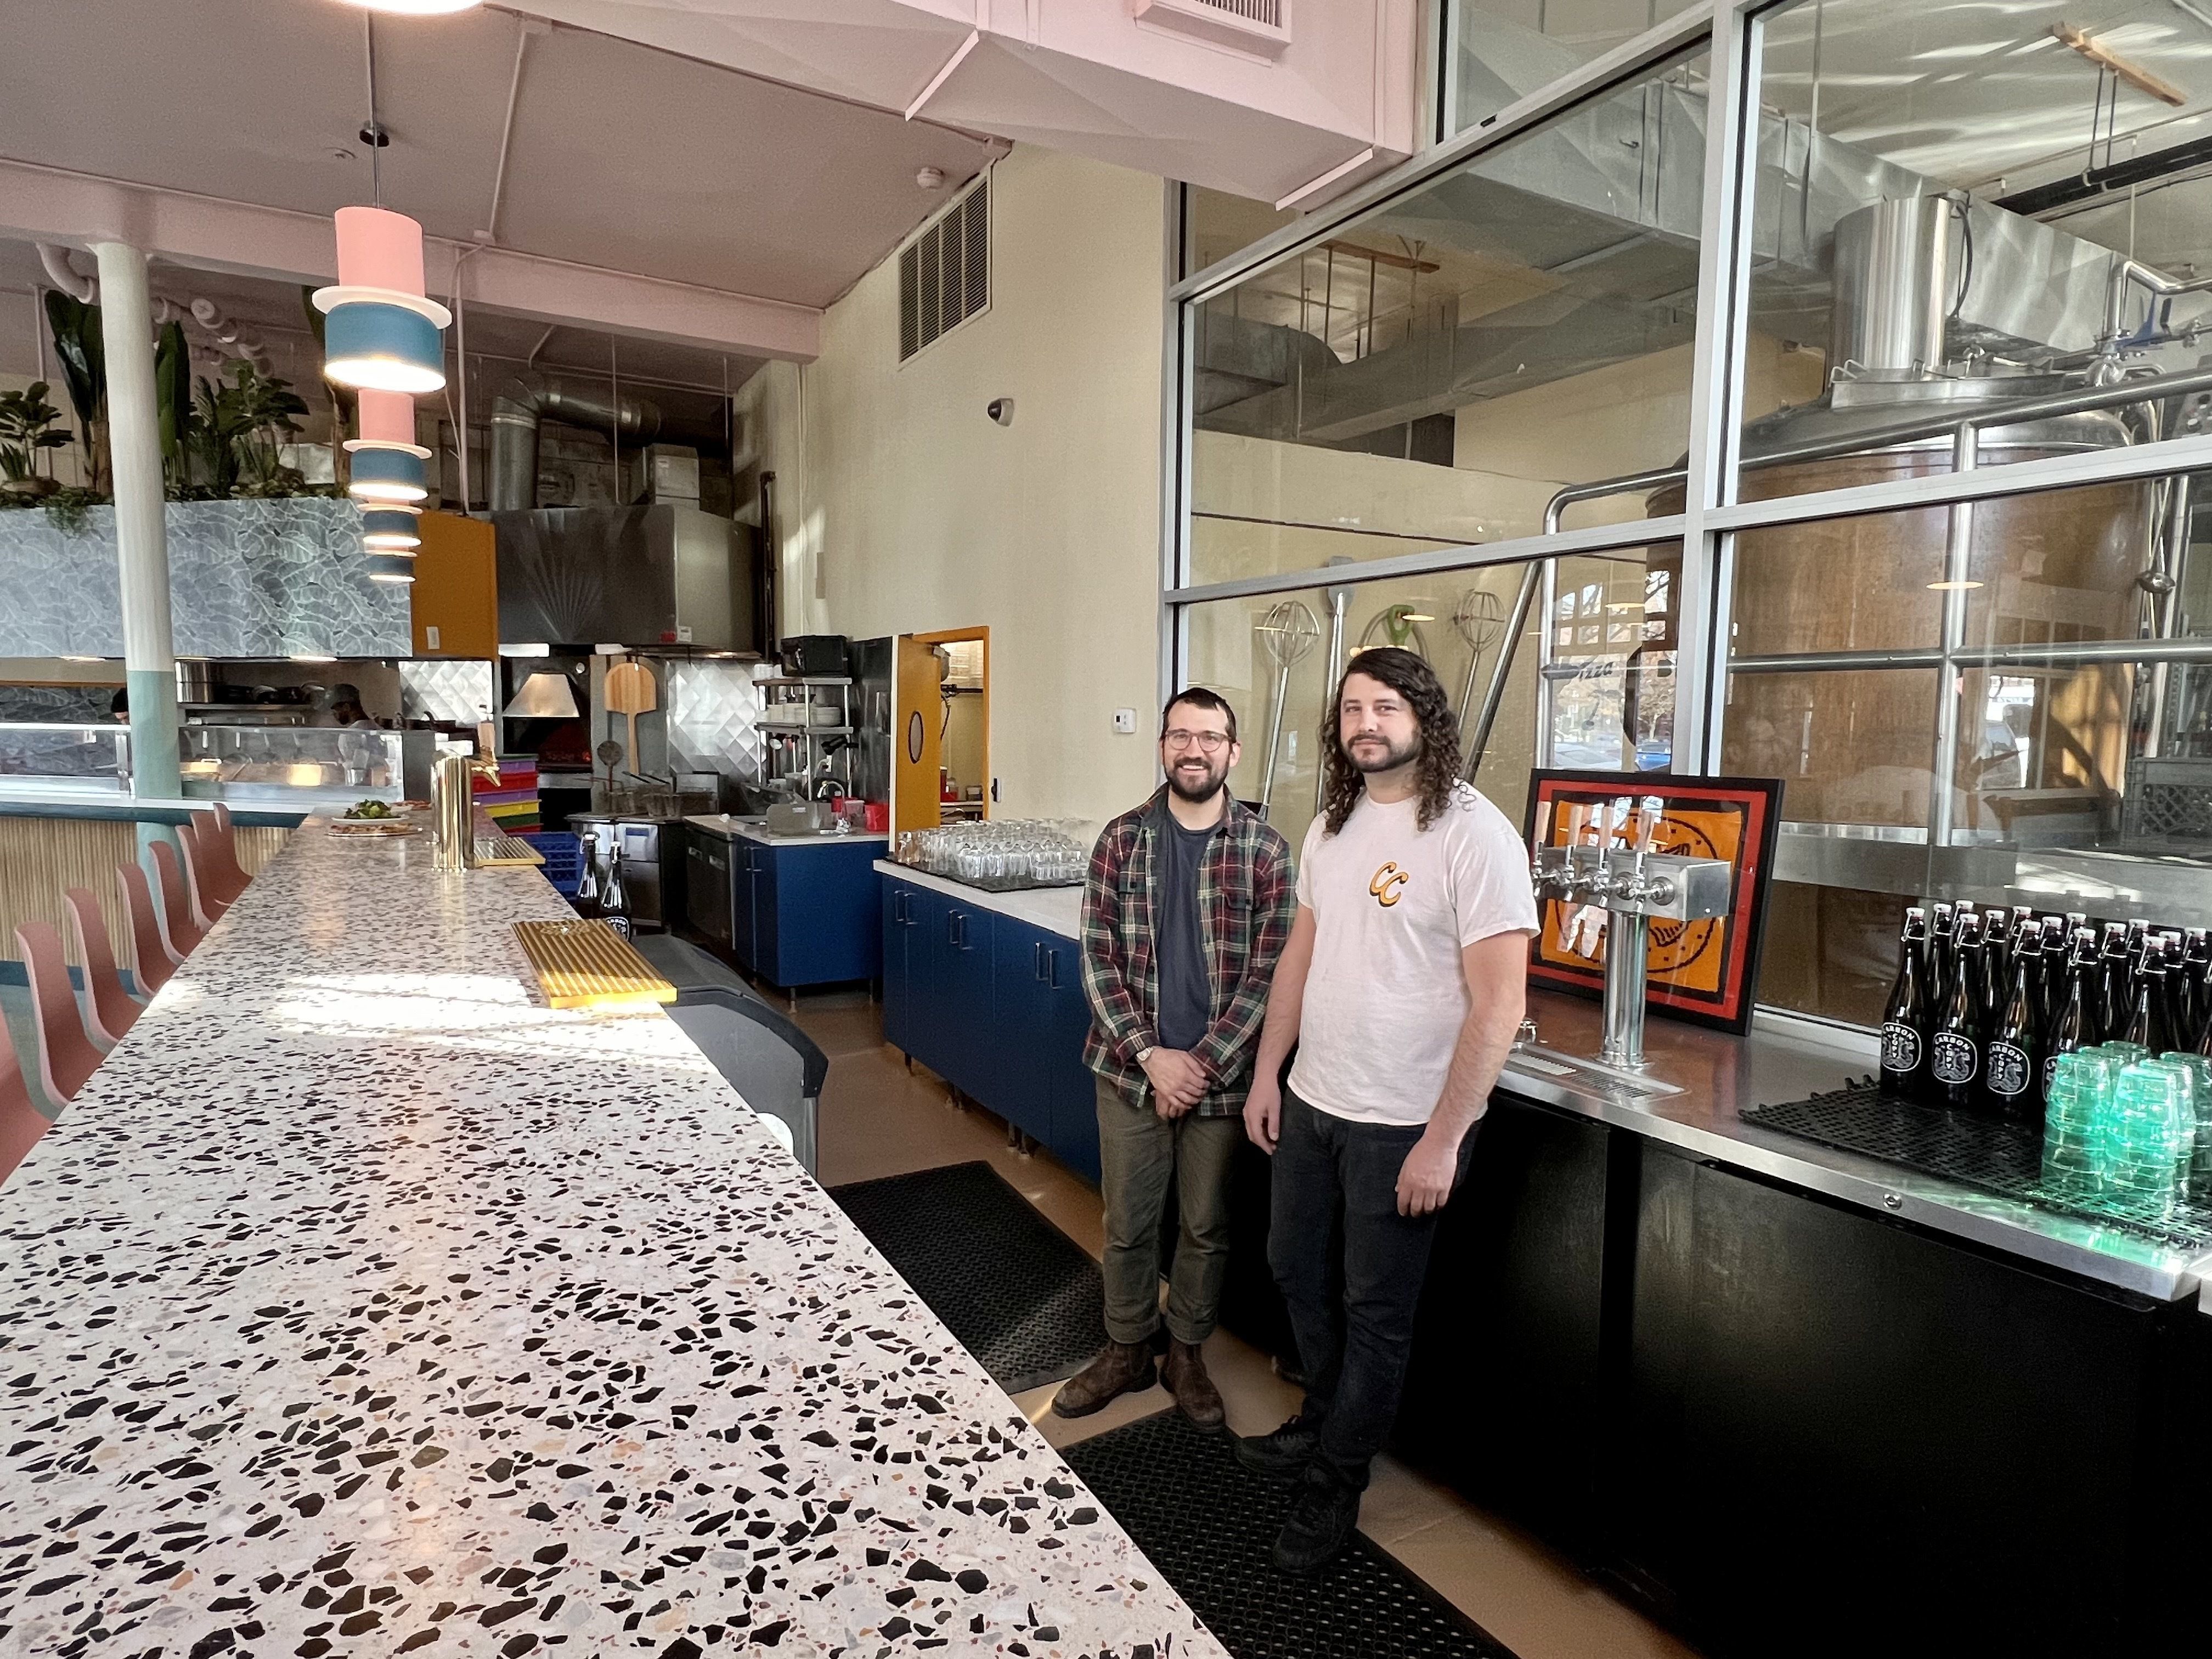 Carbon Copy To Open Fall 2022 In West Philadelphia - Breweries In PA